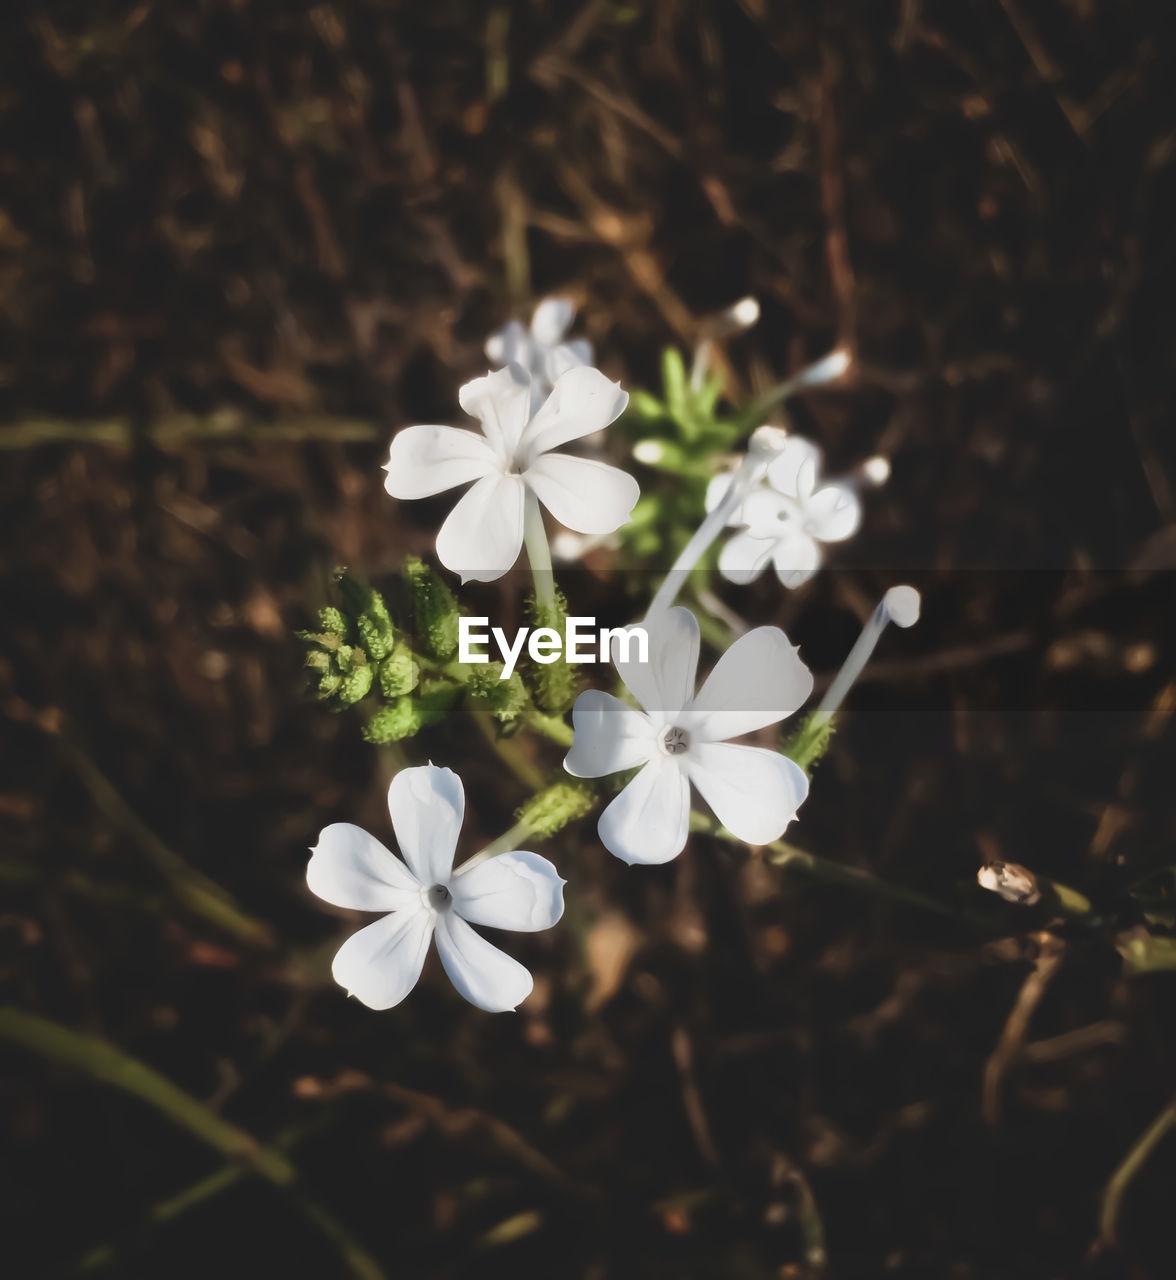 plant, flower, flowering plant, nature, beauty in nature, freshness, white, macro photography, fragility, blossom, close-up, leaf, wildflower, green, growth, petal, flower head, inflorescence, no people, branch, springtime, focus on foreground, outdoors, botany, tree, day, plant part, sunlight